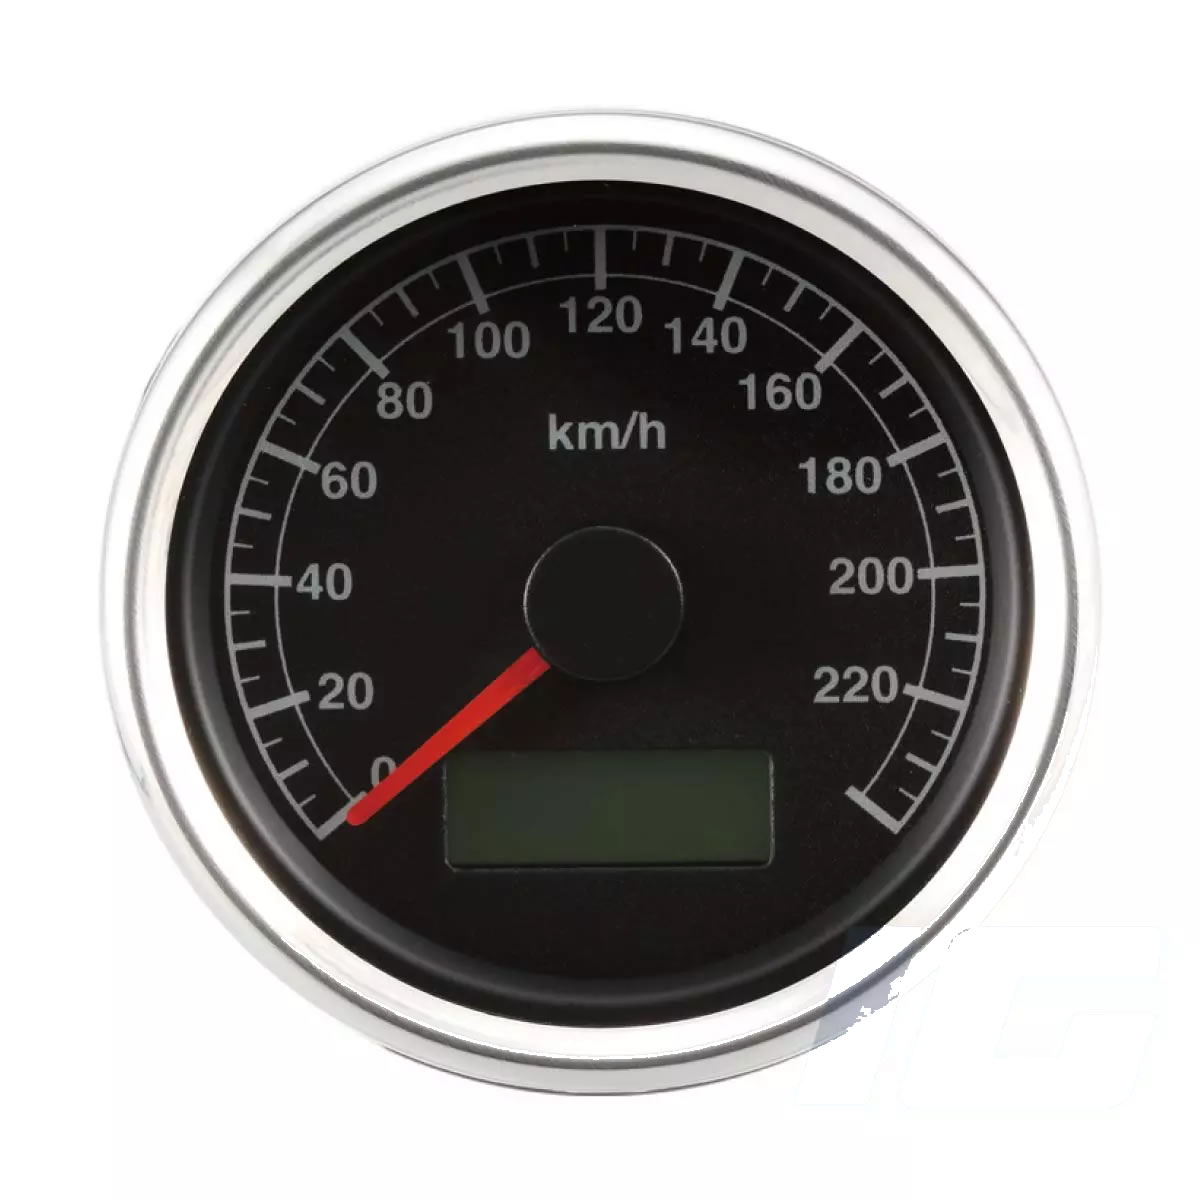 Black Face Universal Aftermarket Gauge - Electronic Speedometer For Motorcycle